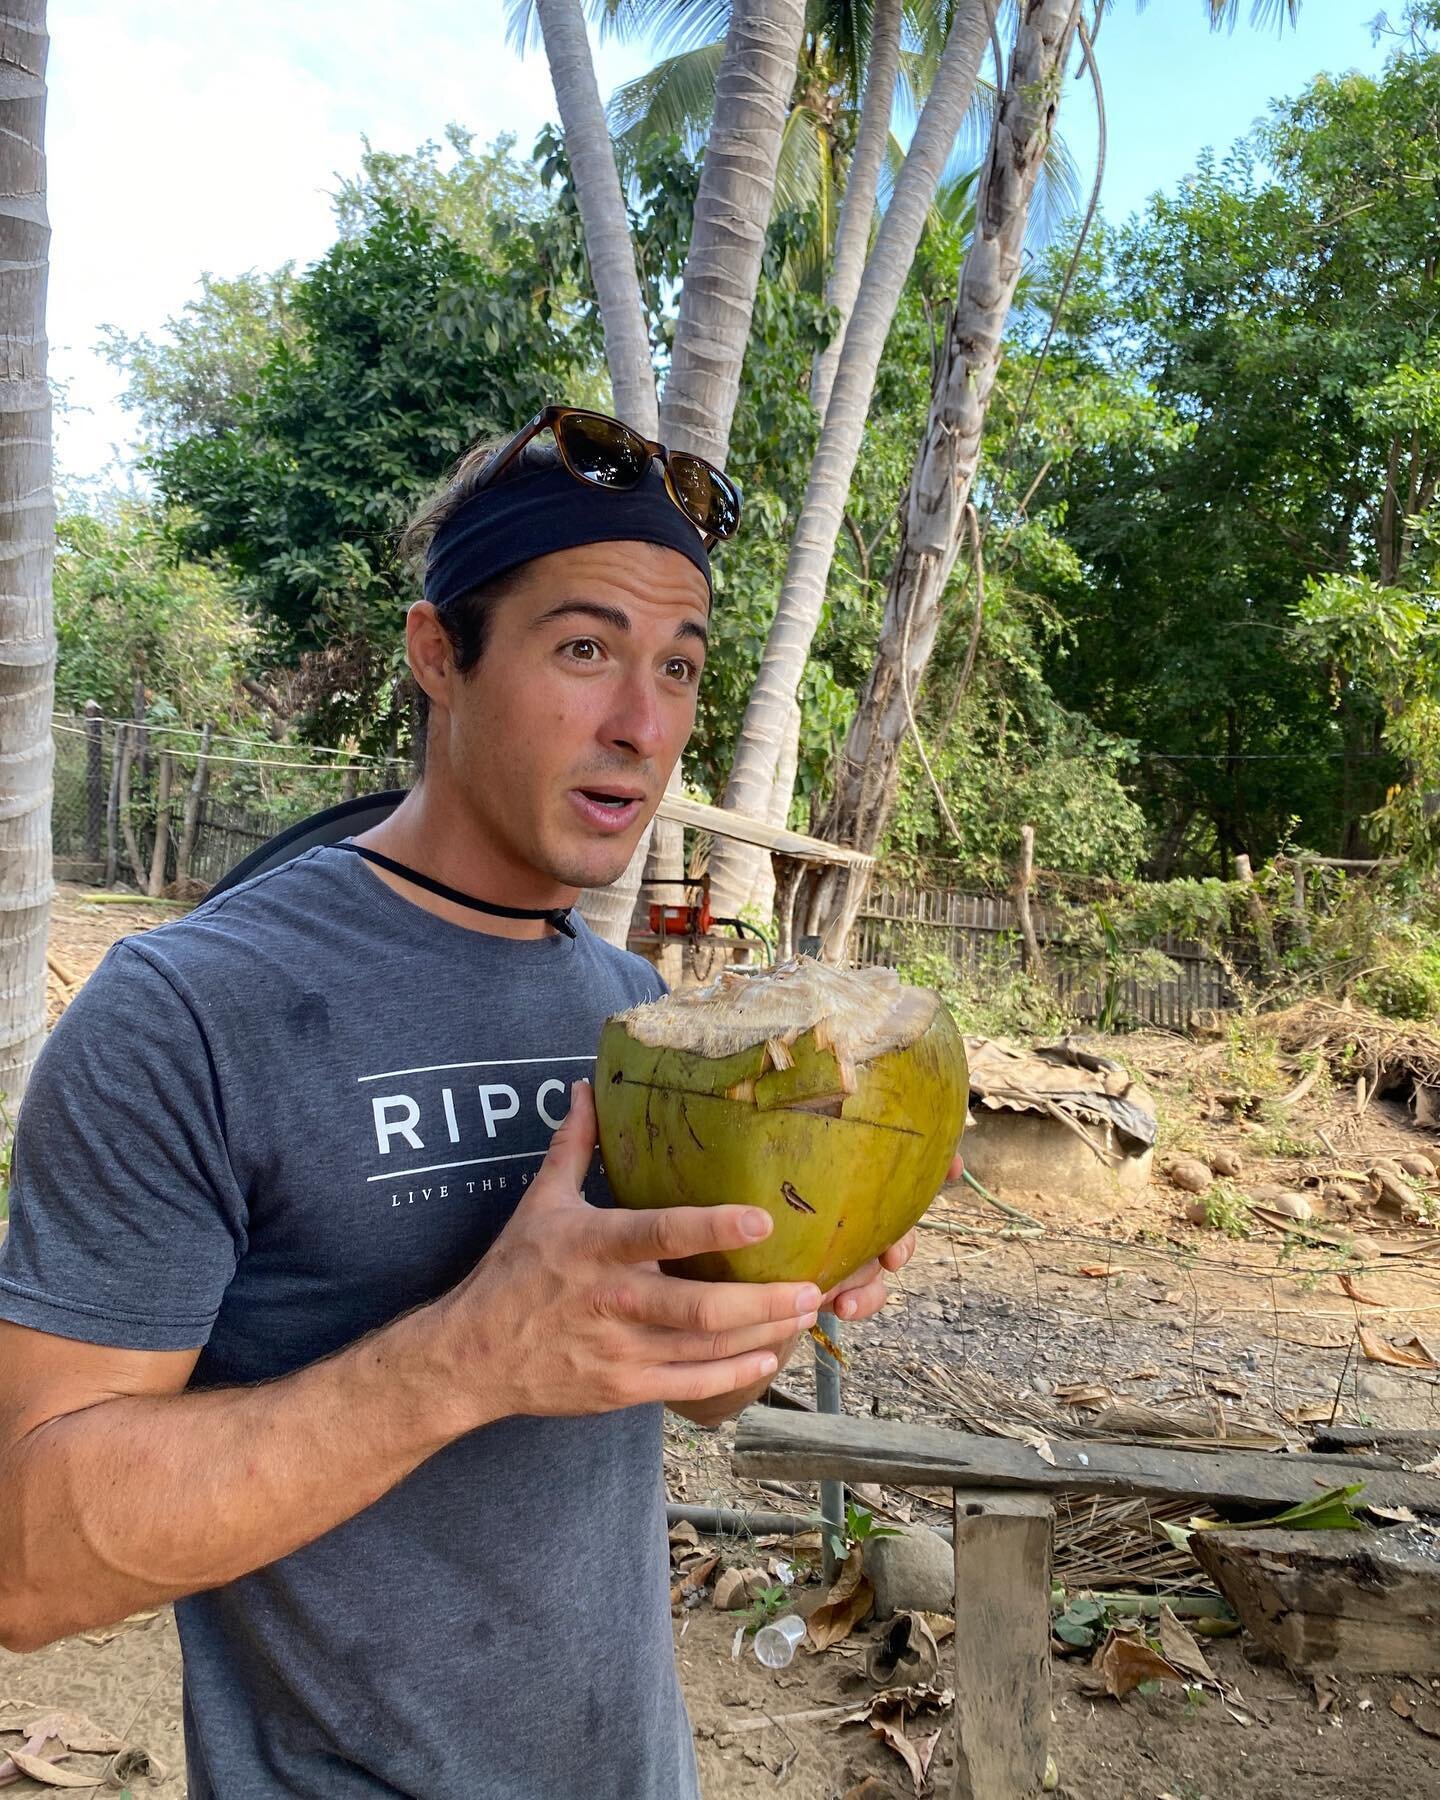 Your face when you realize how much better fresh coconut water tastes than that packaged stuff 😍🥥 @jessfkraus does this face perfectly! 😯 
⠀⠀⠀⠀⠀⠀⠀⠀⠀
#yogaretreatmexico #mexicoadventures #surfandyogaretreat #travelmexico #mexicoretreat #wellnessret